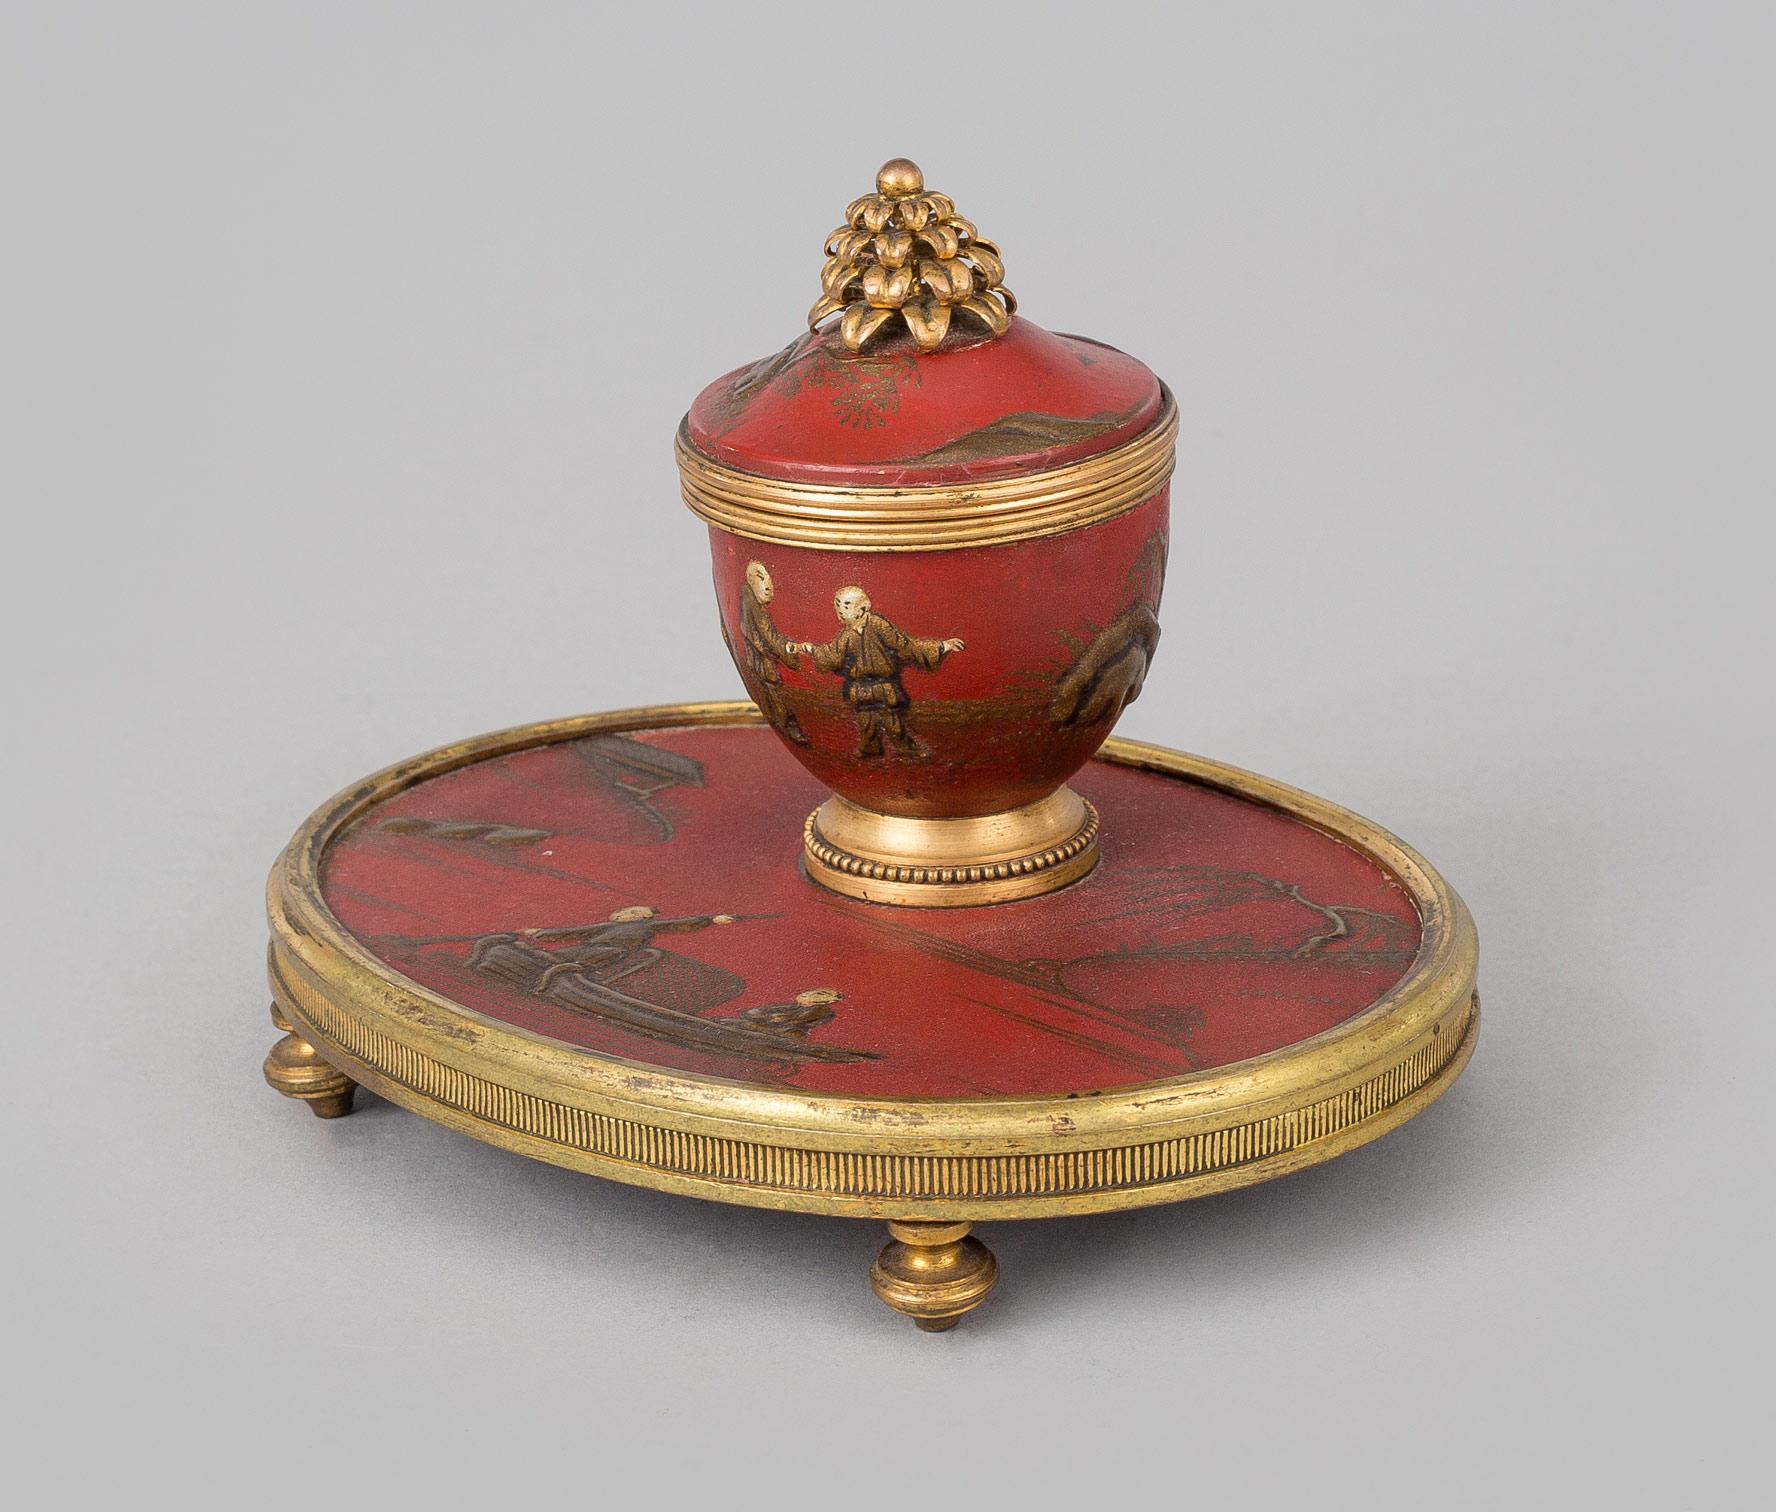 Charming small oval gilded bronze red lacquered chinoiserie inkstand with hinged top revealing the ink receptacle inside, mounted on small gilded feet.